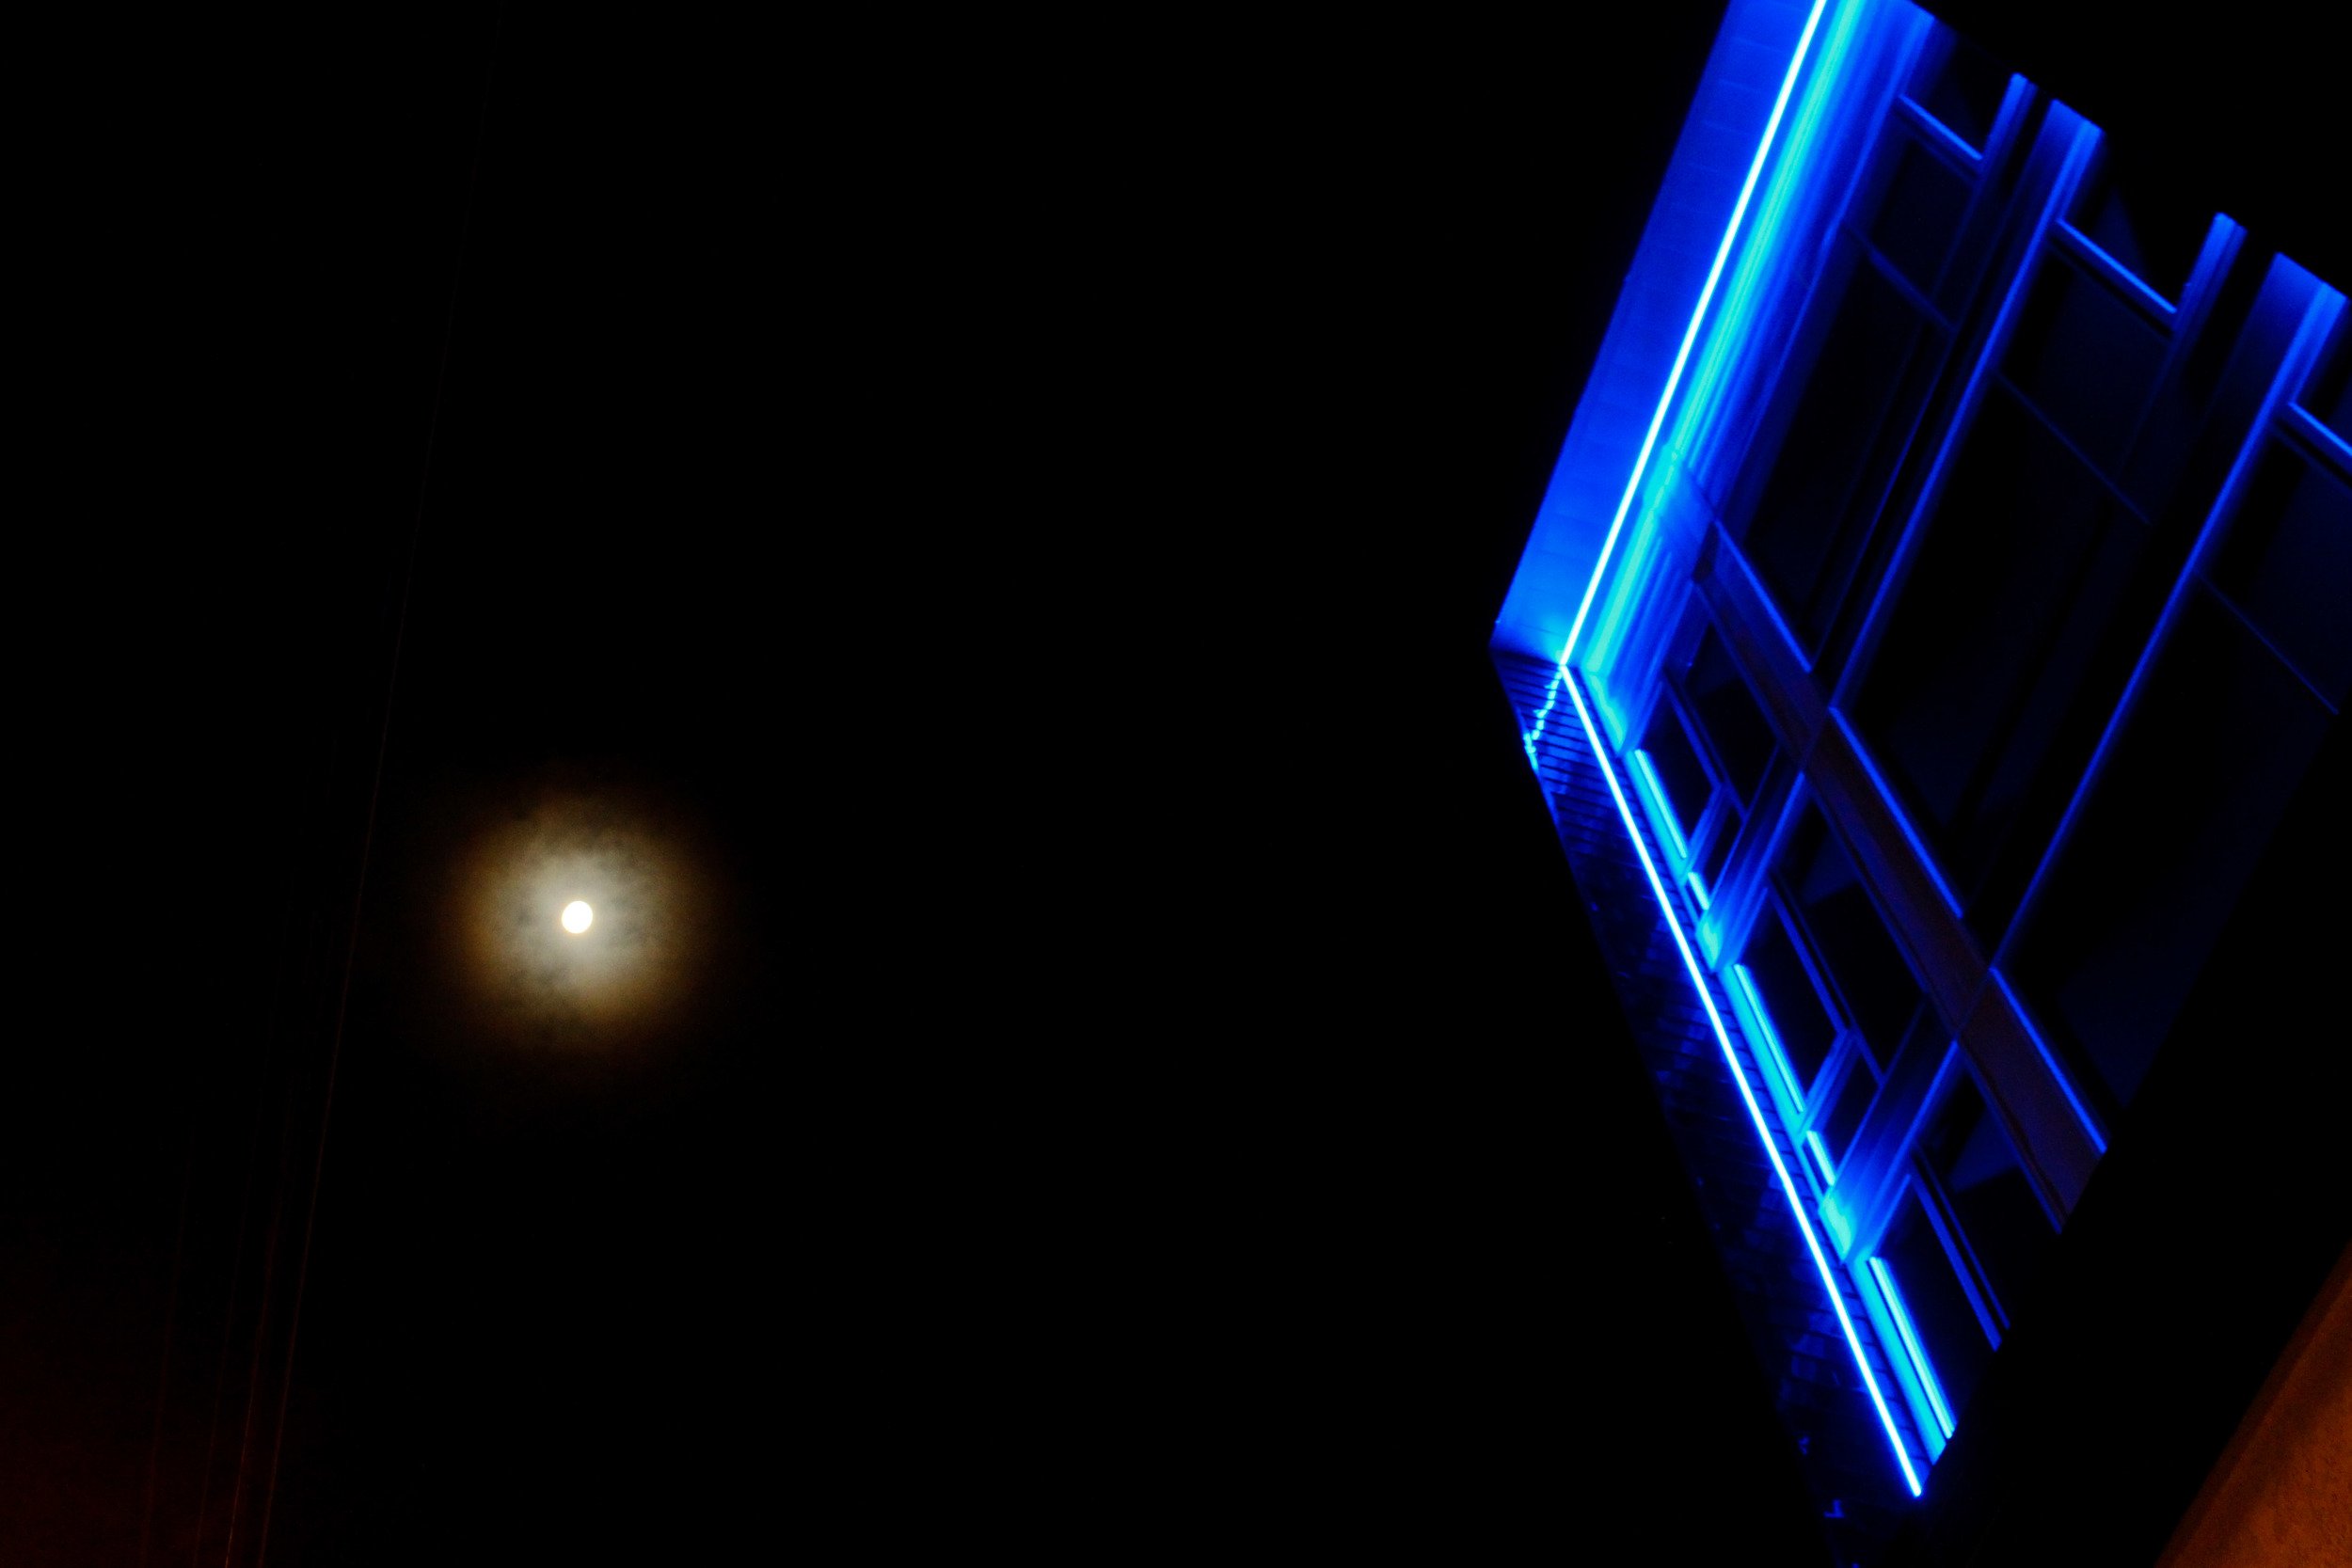 cpr blog post photo - blue neon lights on seattle apartment with moon in background.jpeg